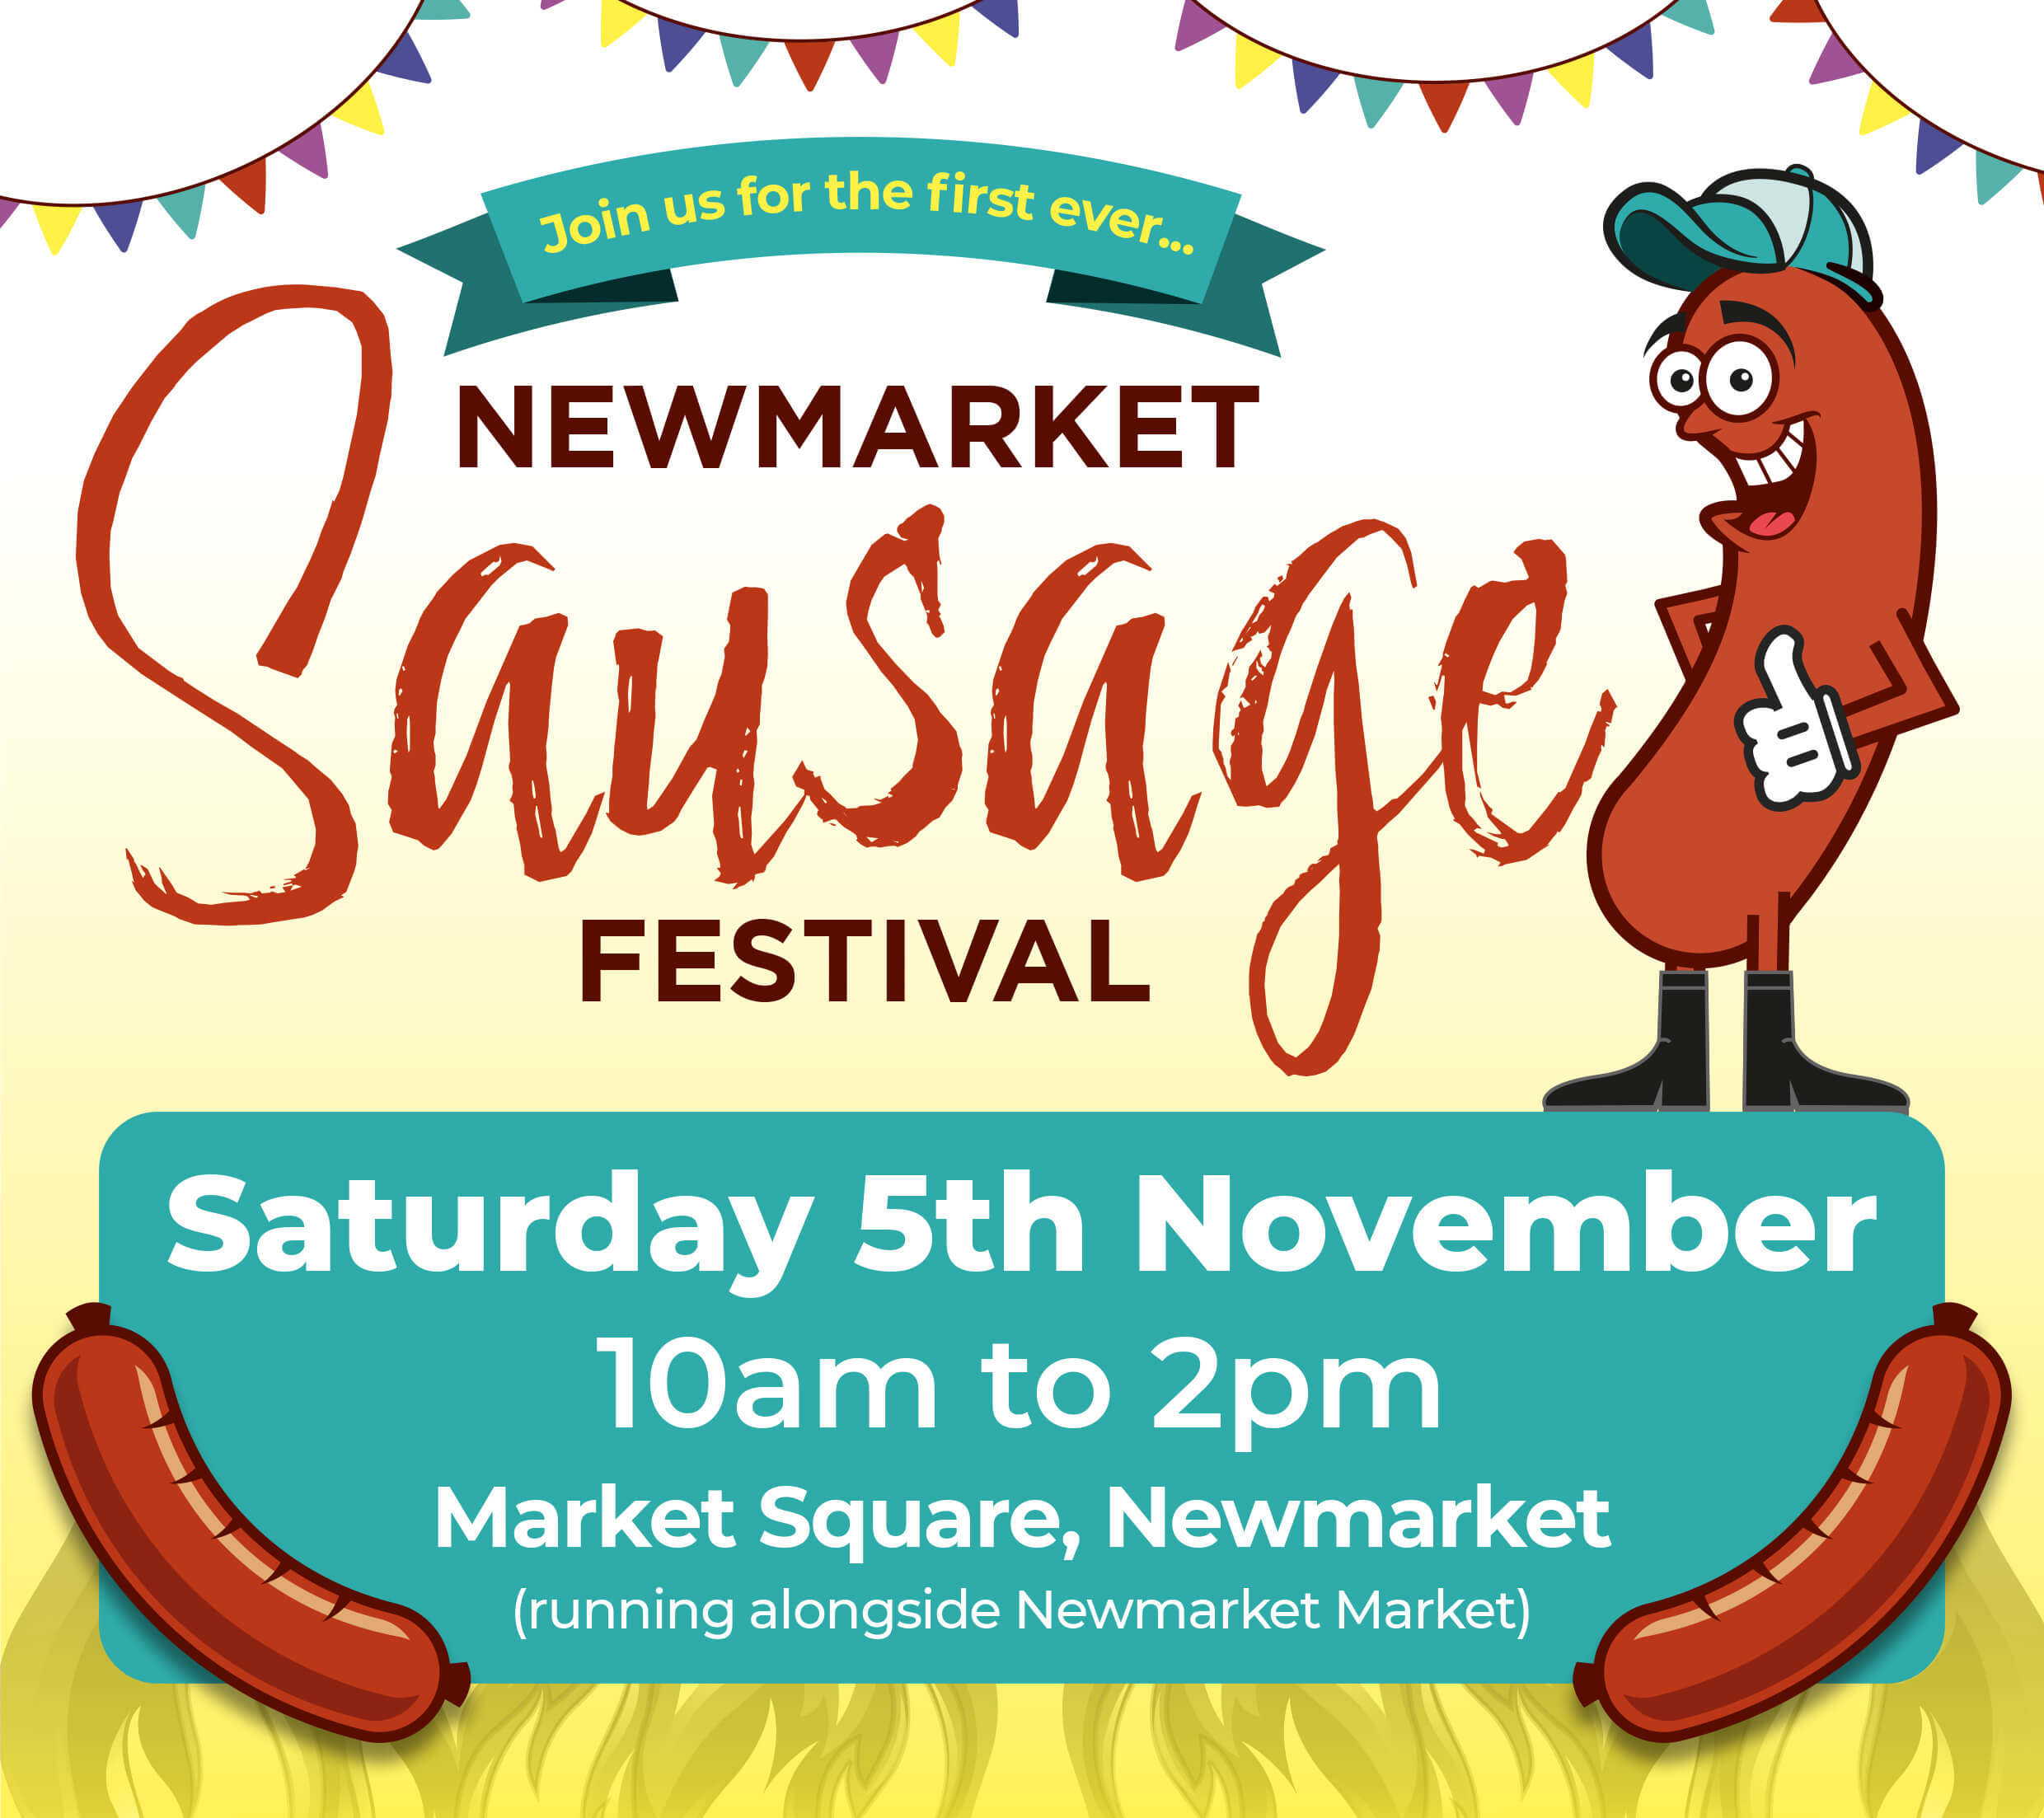 Introducing Newmarket's First Ever Sausage Festival! - Discover Newmarket -  Discover Newmarket